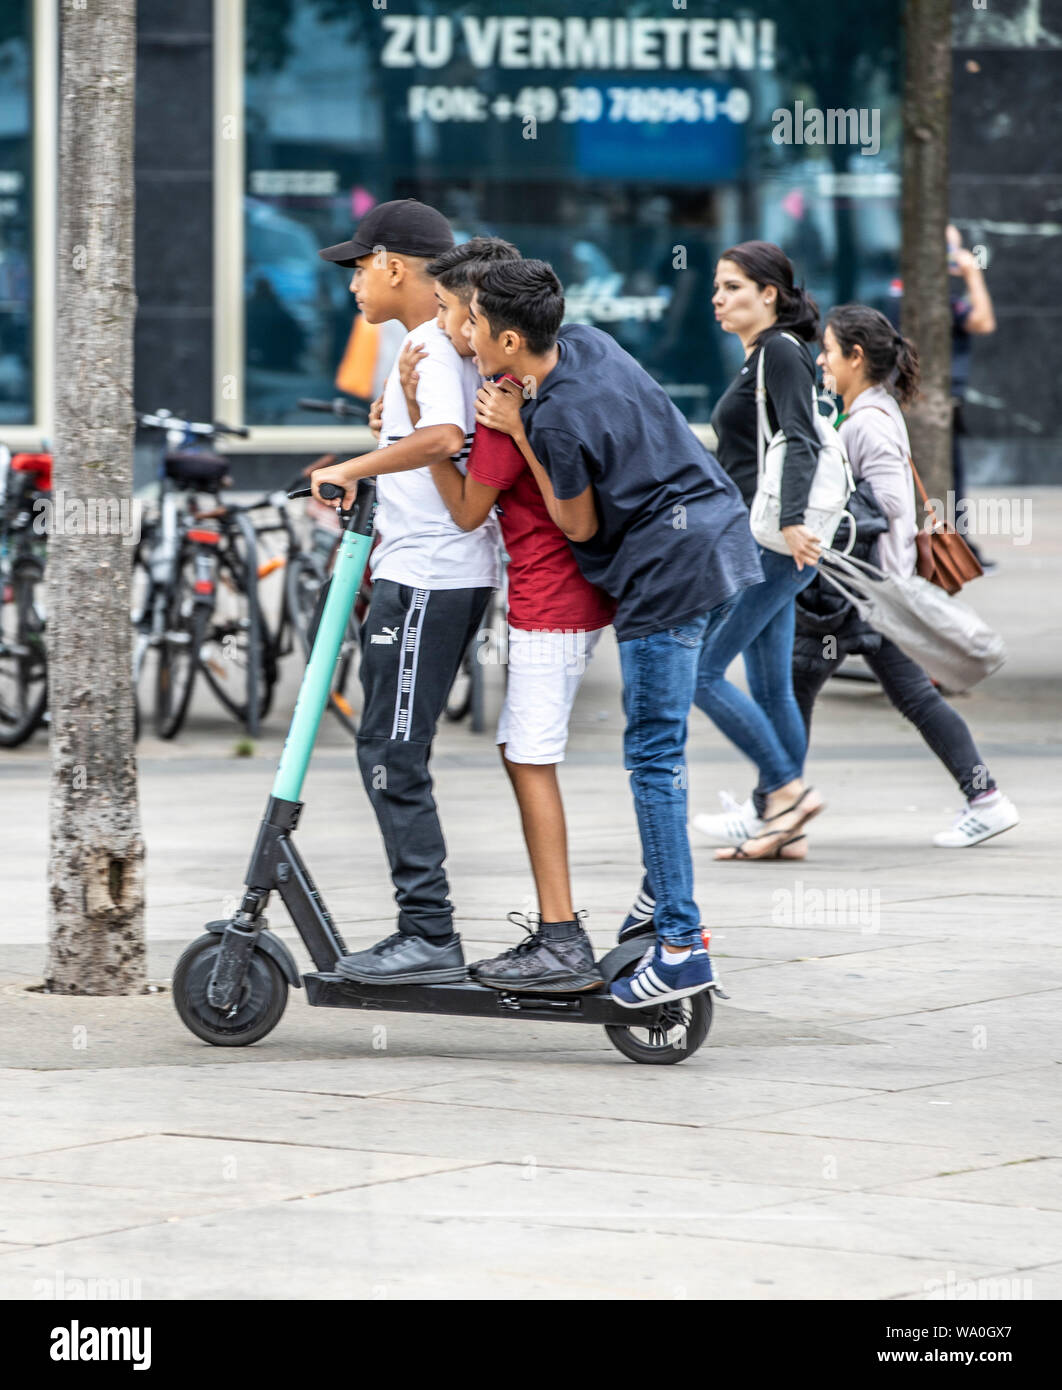 electric rental scooter, driving, at Alexander Platz, Berlin, 3 people on one scooter Stock Photo Alamy